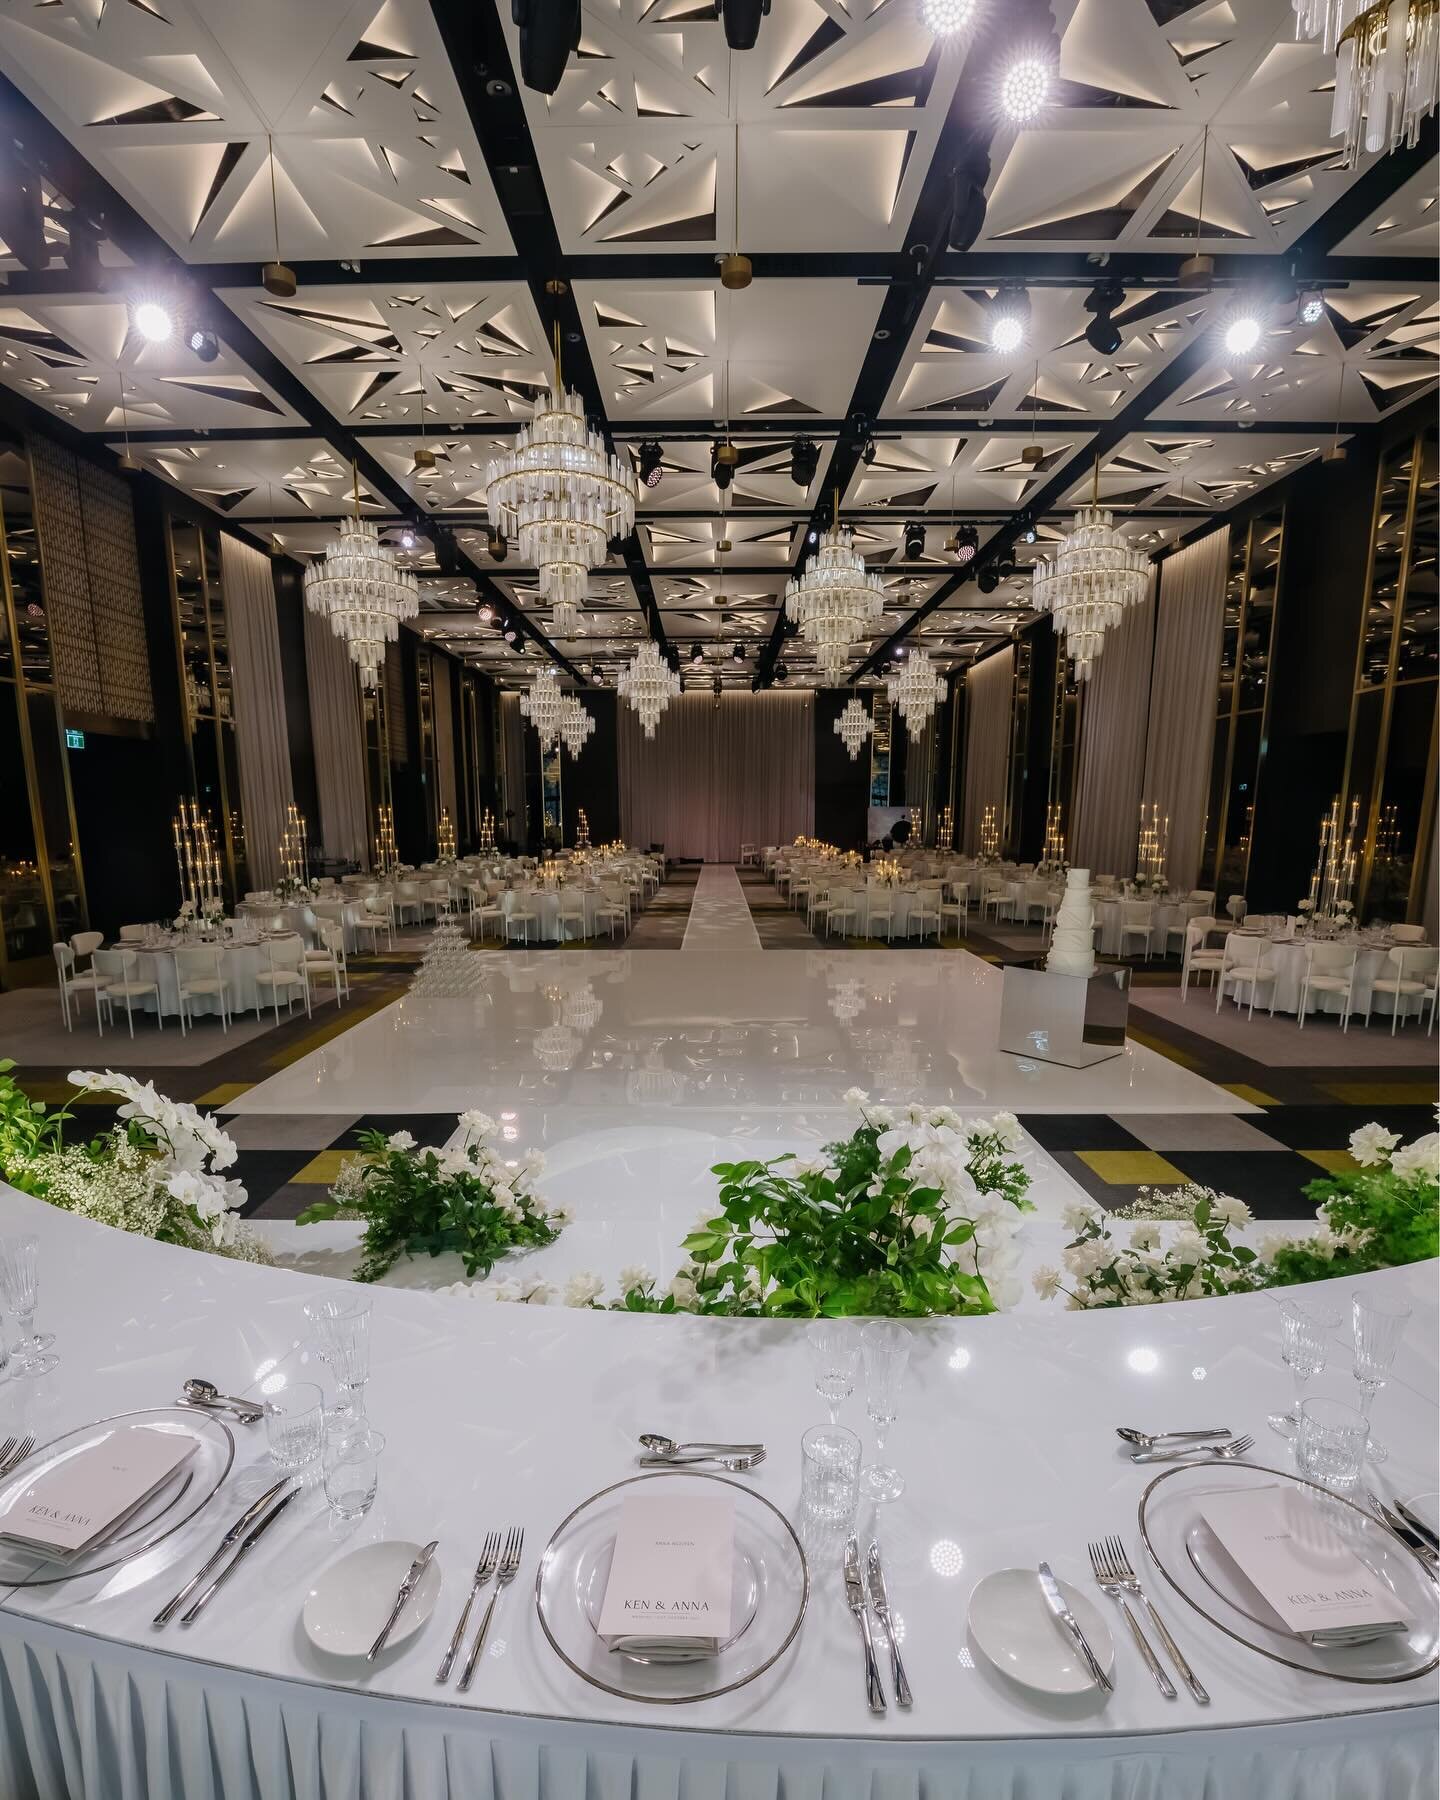 &bull; K E N &bull; A N N A &bull; the ceremony &bull; 
Creating wedded experiences in luxury @theritzcarltonmelbourne for our Ken and Anna 
S T Y L I N G + D E S I G N + P R O D U C T I O N @jimketevents 
Venue @theritzcarltonmelbourne 
Styling phot